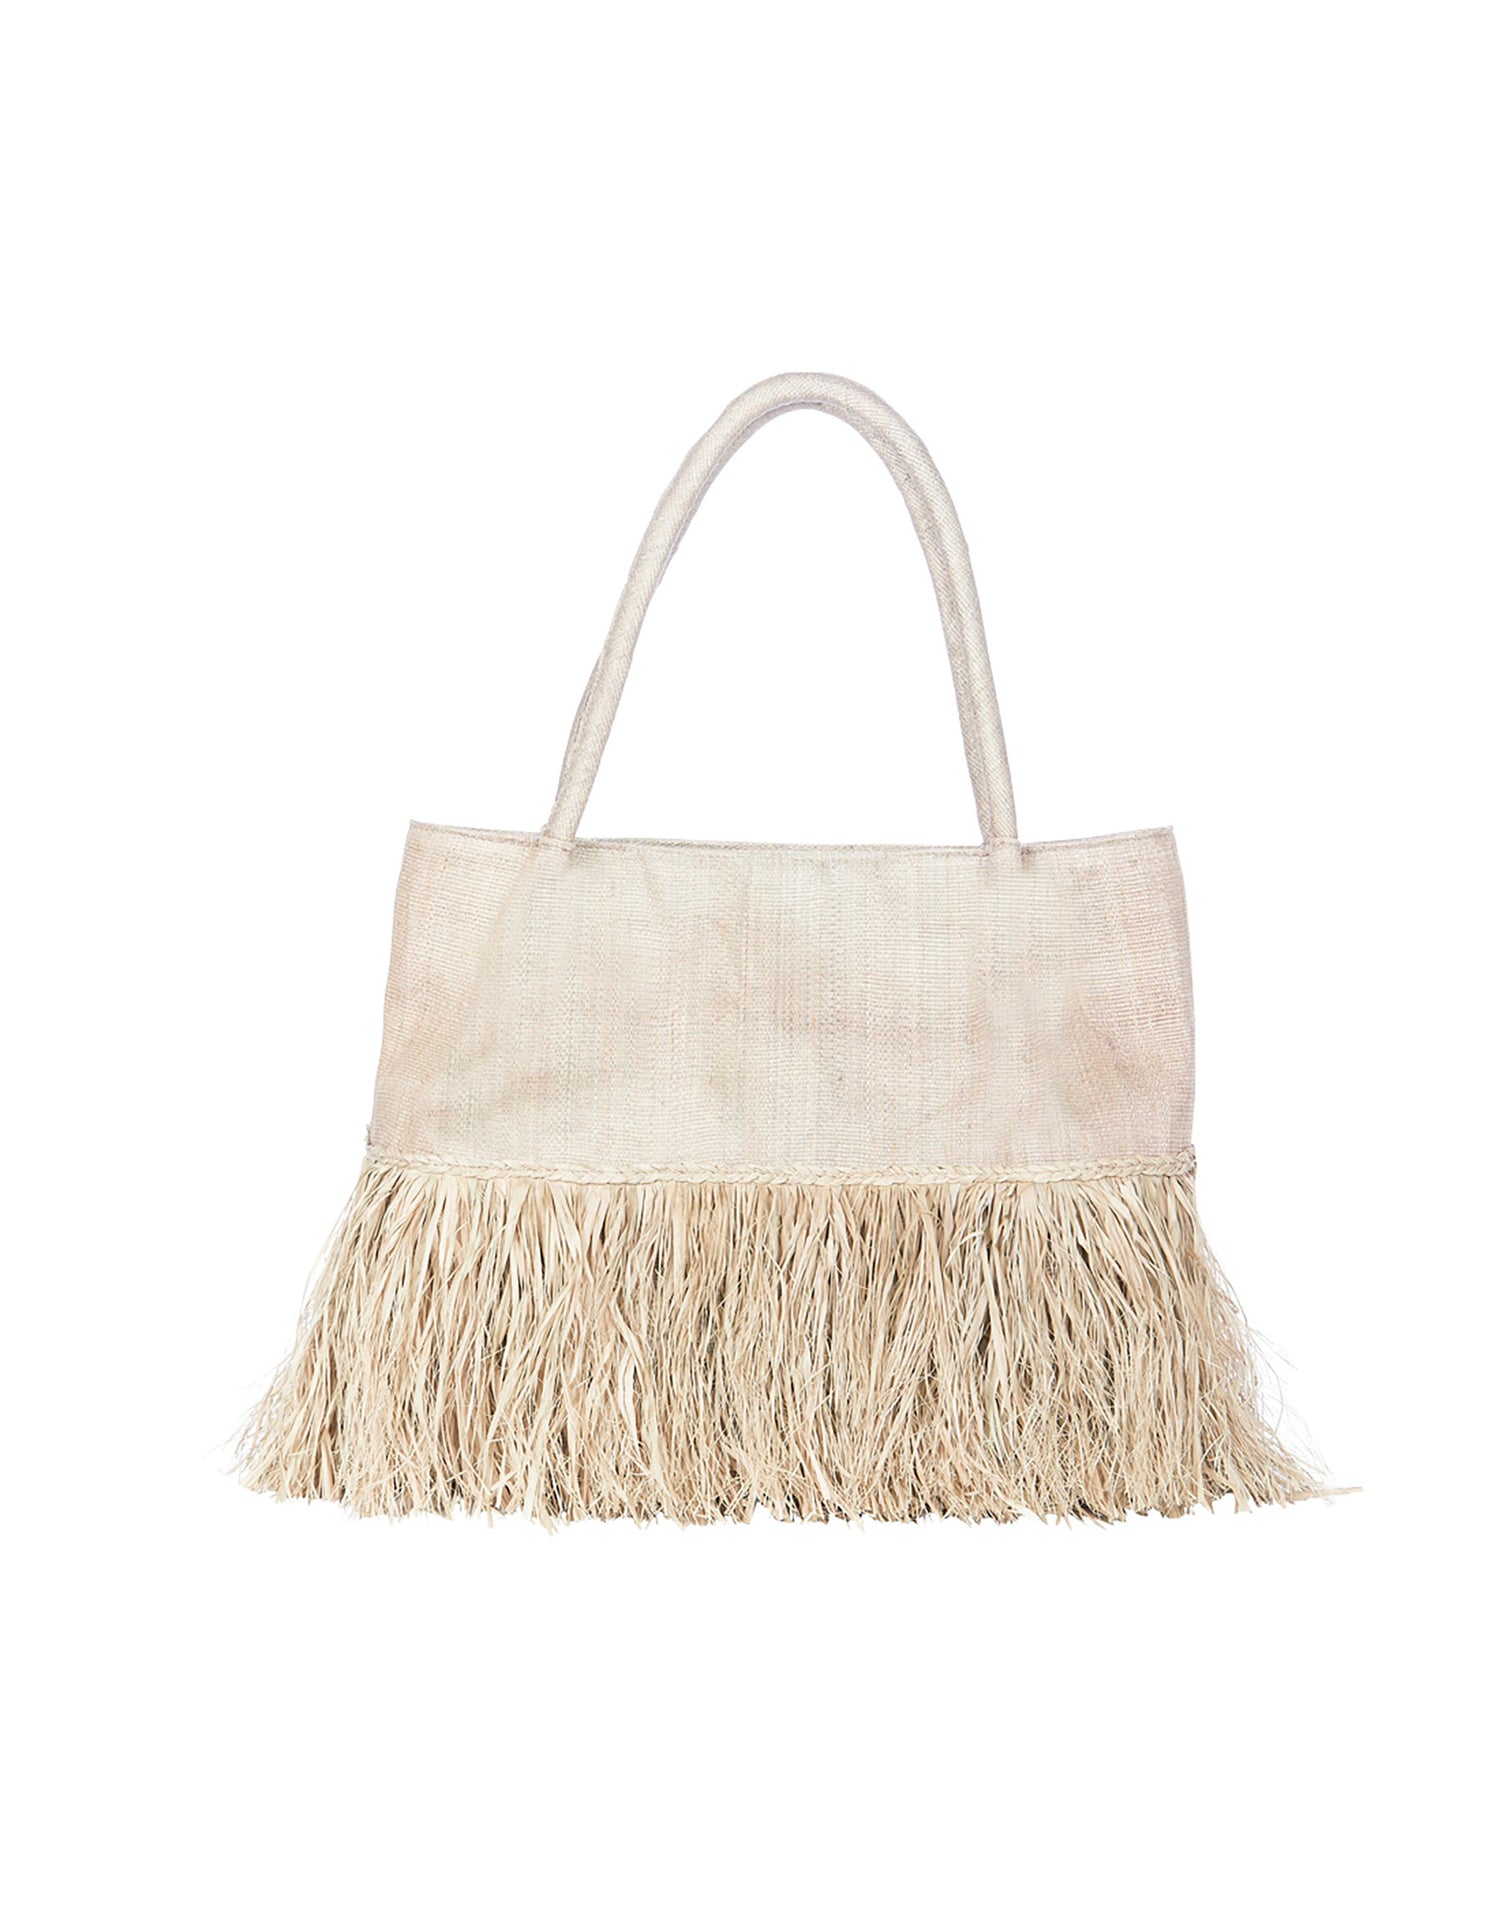 Sintra Tote by Florabella in Ivory - Product View